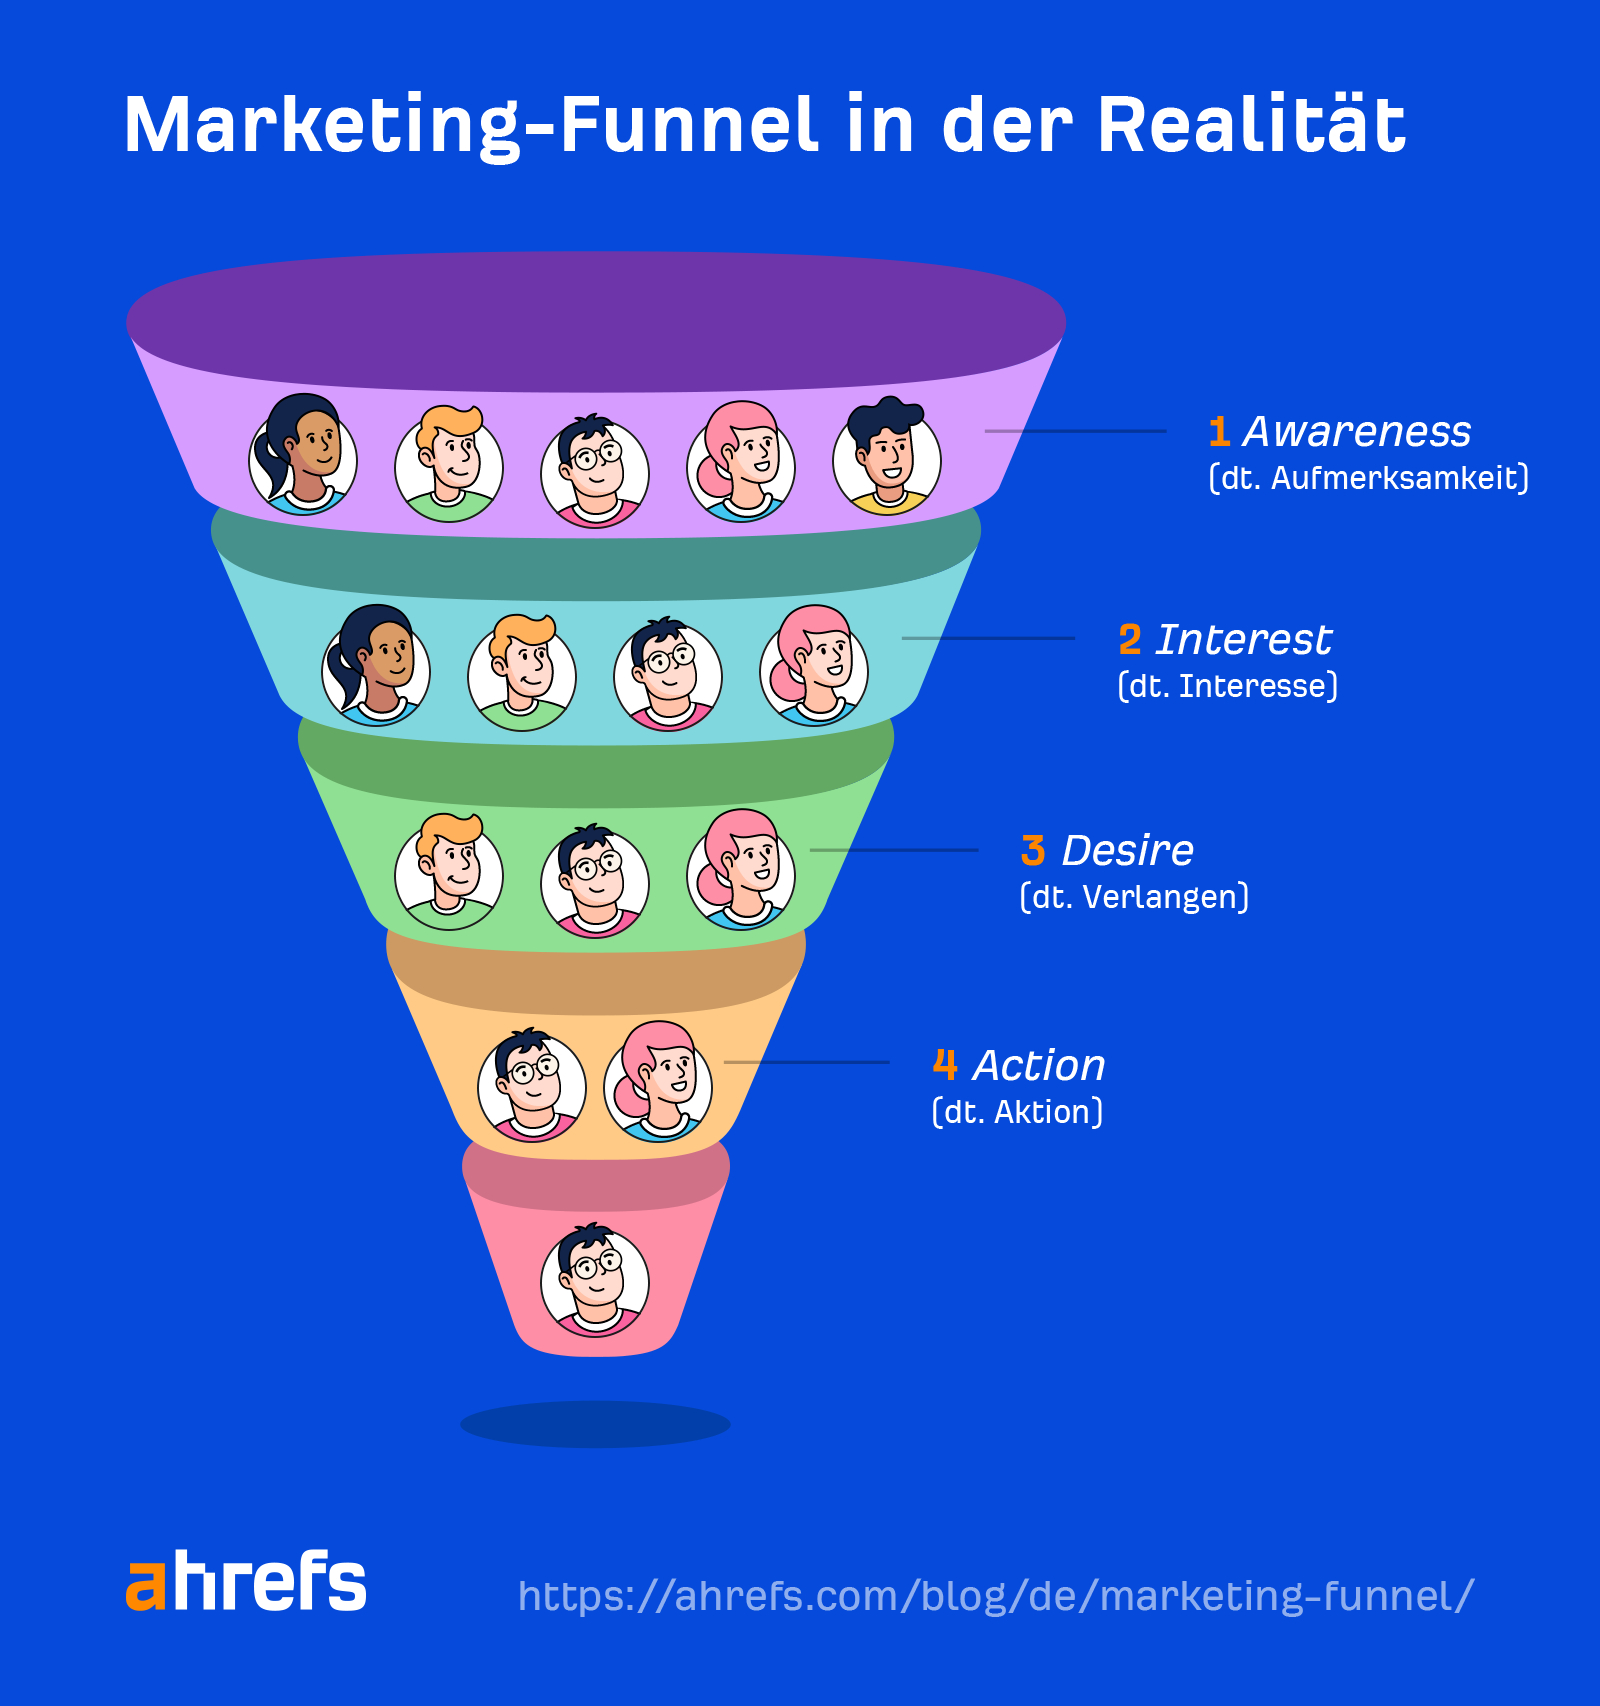 The marketing funnel in reality